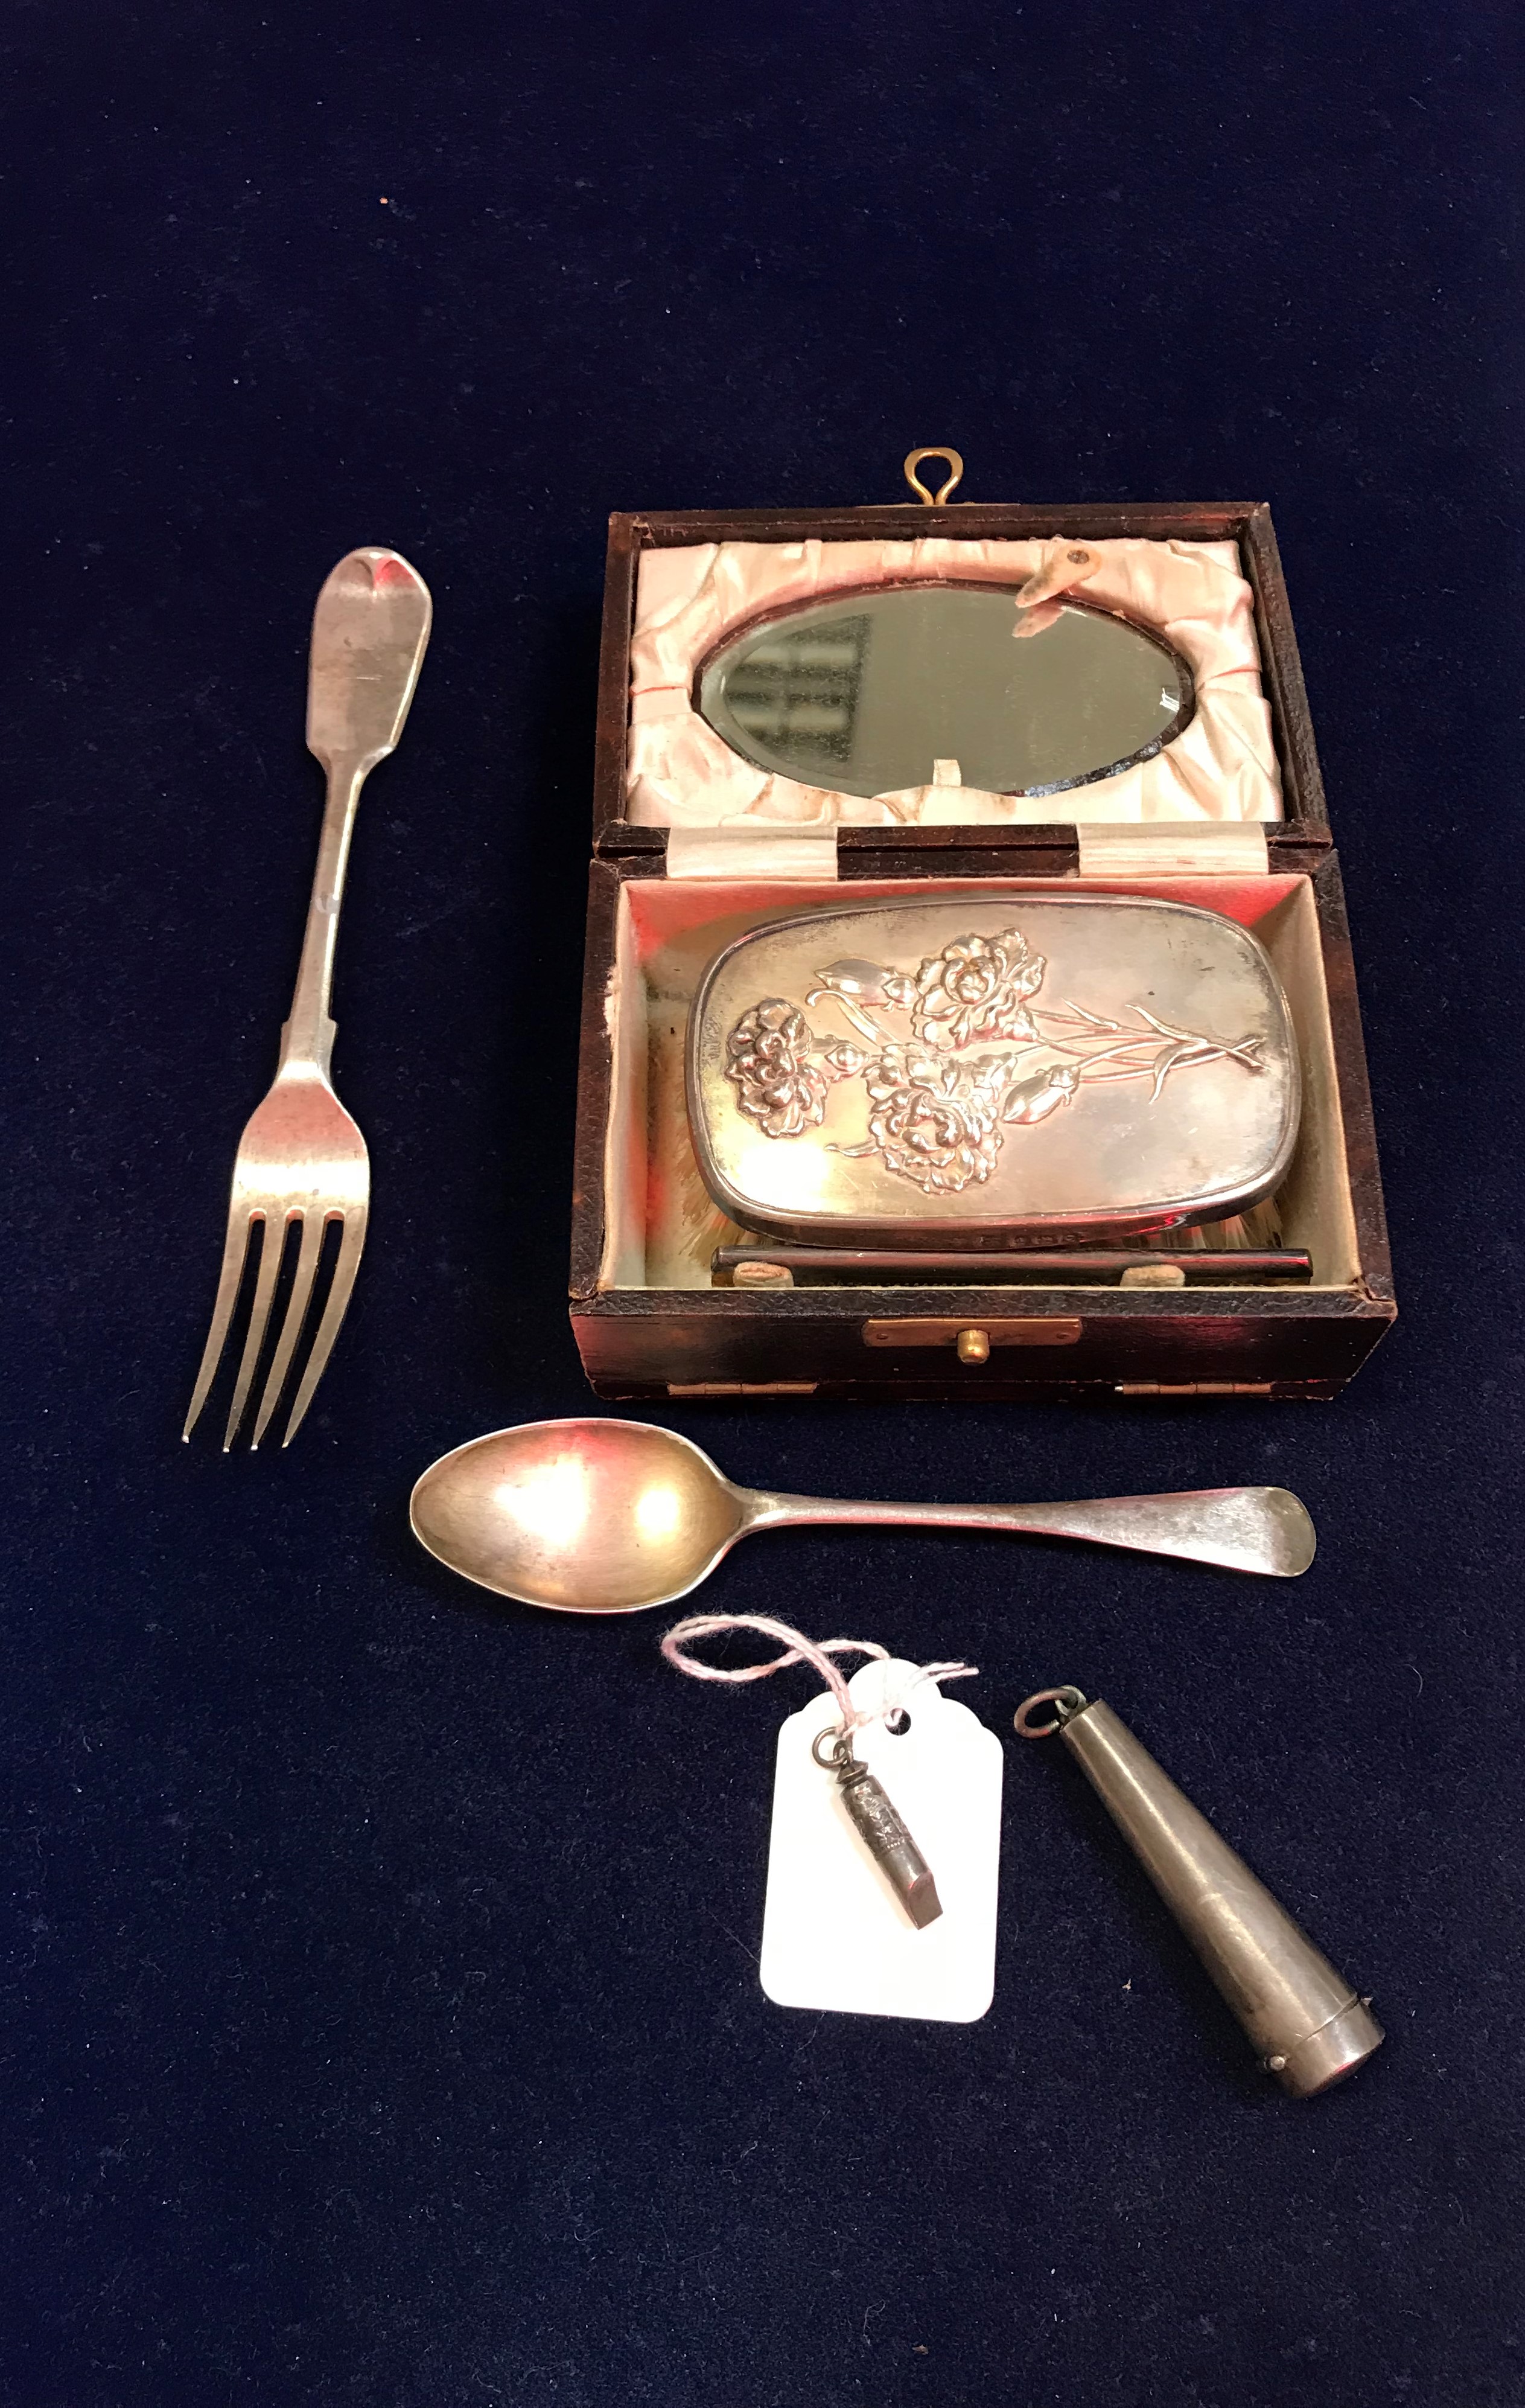 A George V travelling brush set with embossed floral spray decorated backed brush and silver